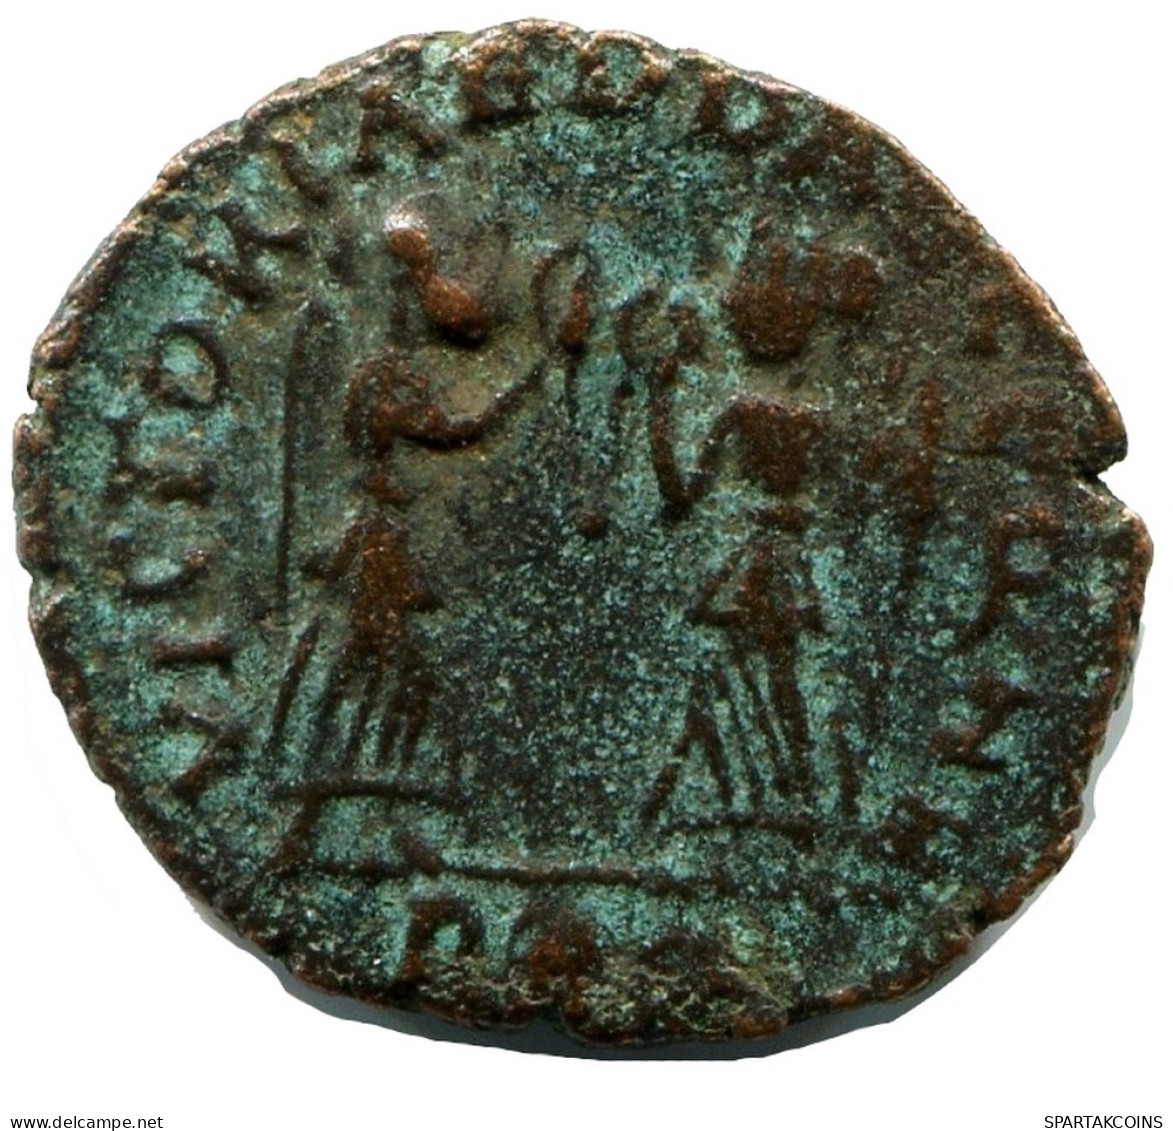 CONSTANS MINTED IN ROME ITALY FOUND IN IHNASYAH HOARD EGYPT #ANC11525.14.E.A - The Christian Empire (307 AD To 363 AD)